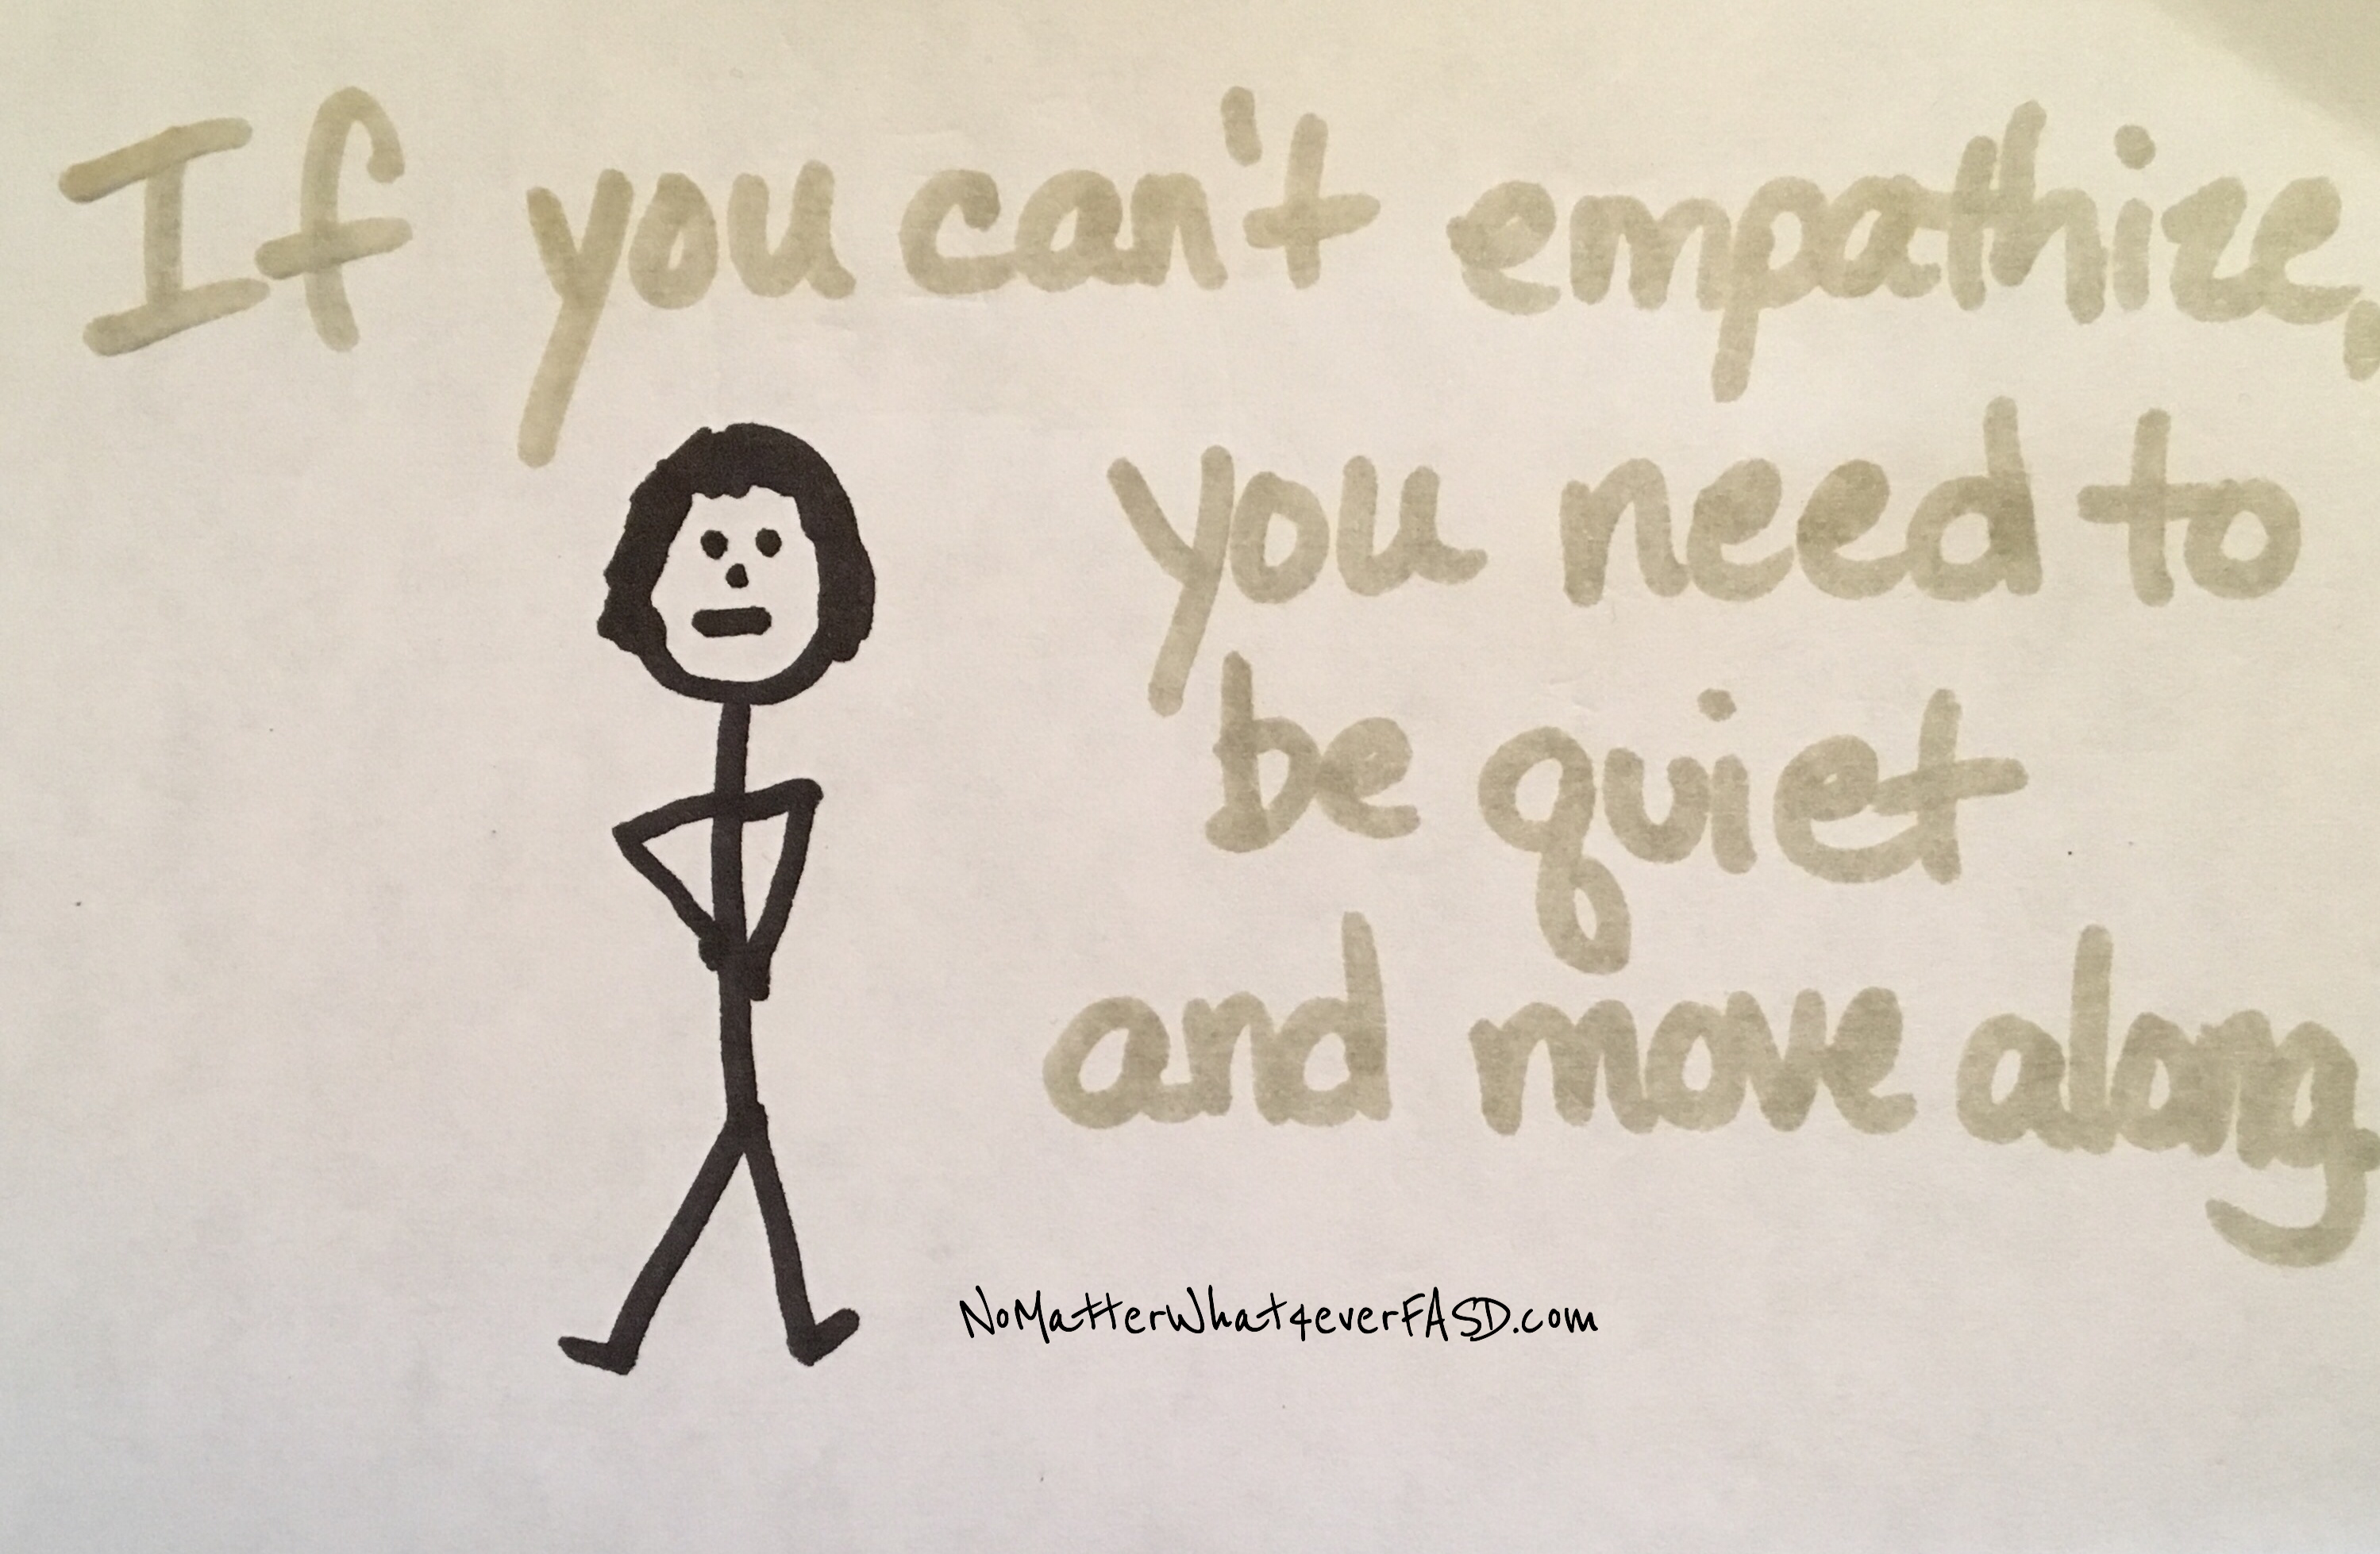 Hand drawing of stick figure with hands on hips and the words If you can't empathize, you need to be quiet and move along.